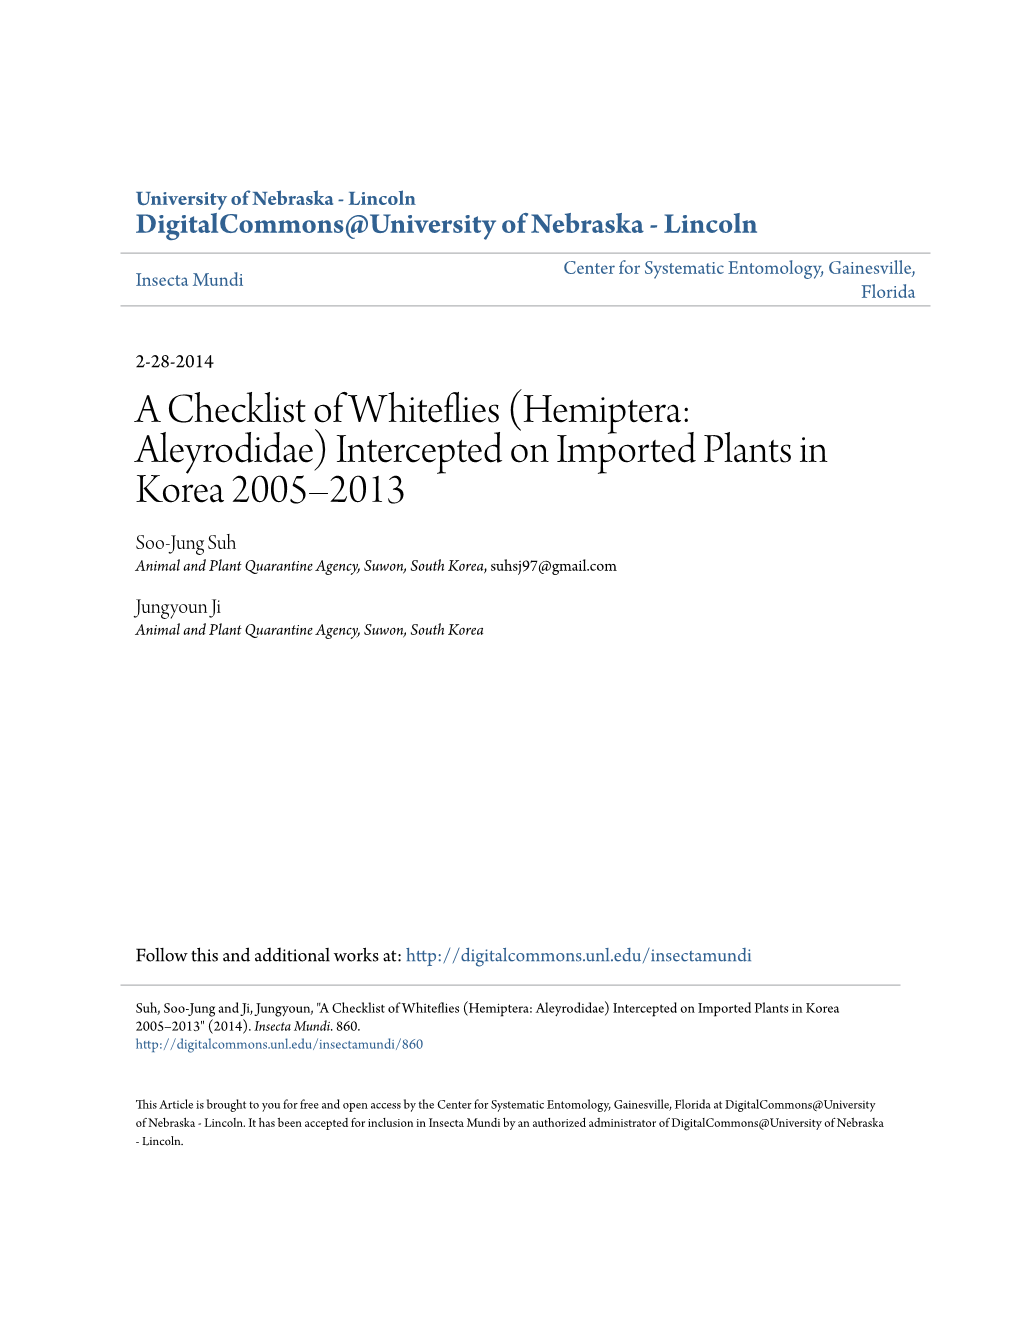 A Checklist of Whiteflies (Hemiptera: Aleyrodidae) Intercepted on Imported Plants in Korea 2005–2013" (2014)